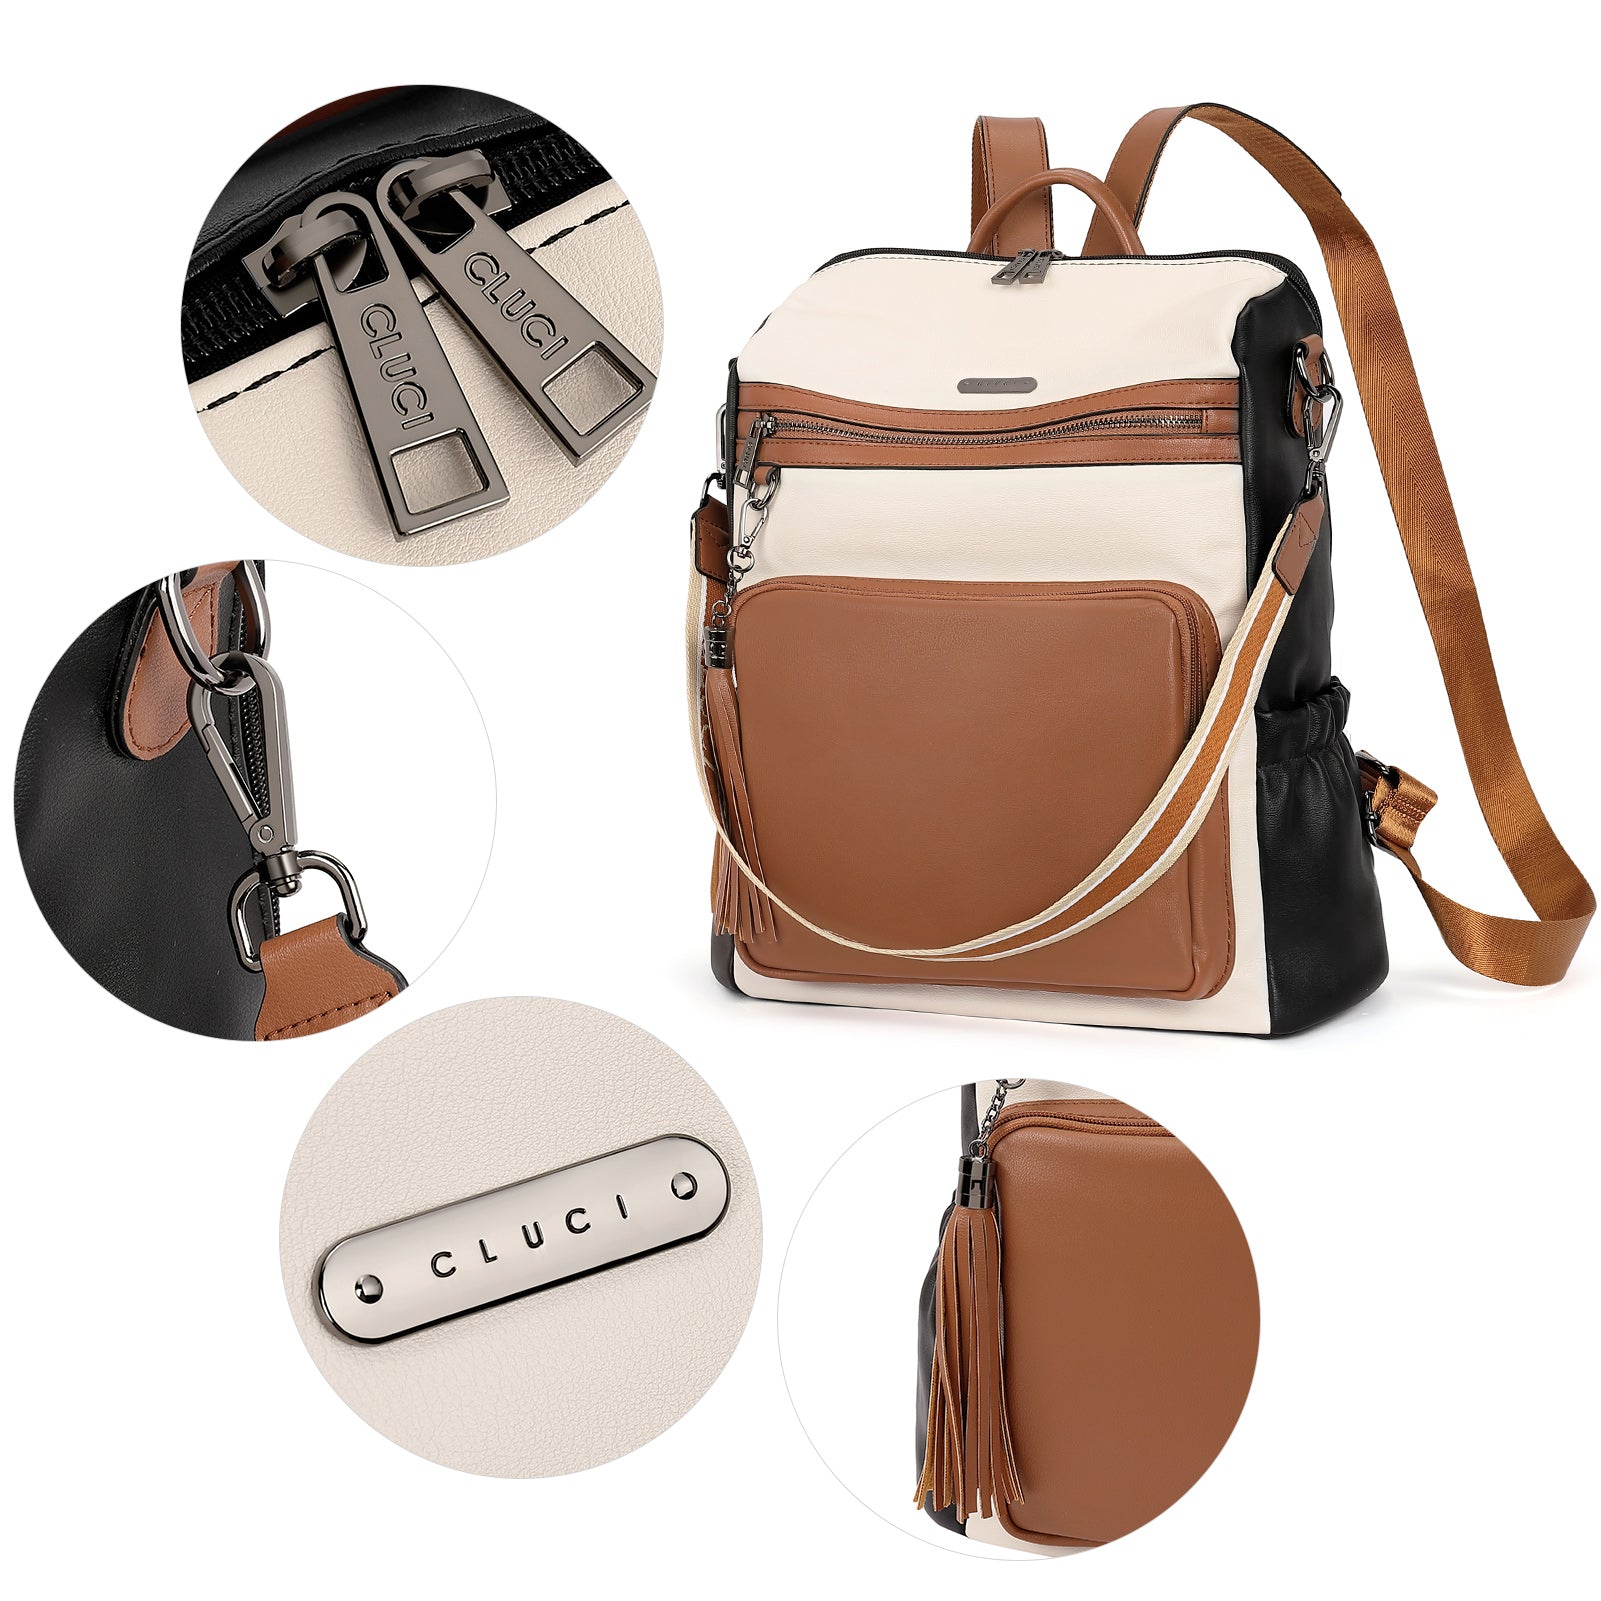 Stylish Designer Hand Luggage Backpack For Men And Women Ideal For Travel,  School, And Work Crossbody, Shoulder, Tote, Handbag Options Available From  Superjerseys8, $76.17 | DHgate.Com